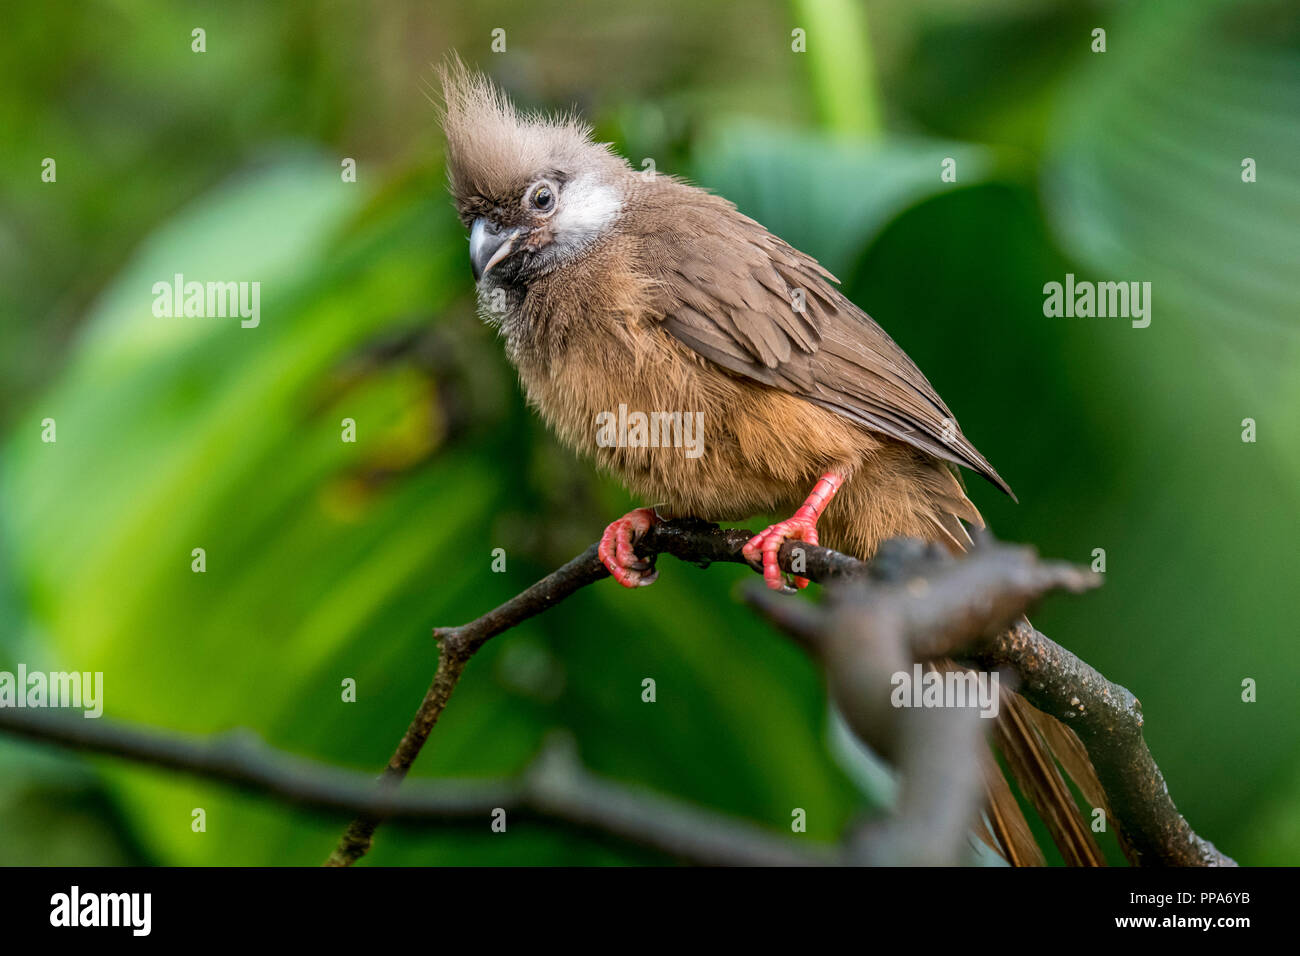 Speckled mousebird (Colius striatus) native to Africa perched in tree Stock Photo